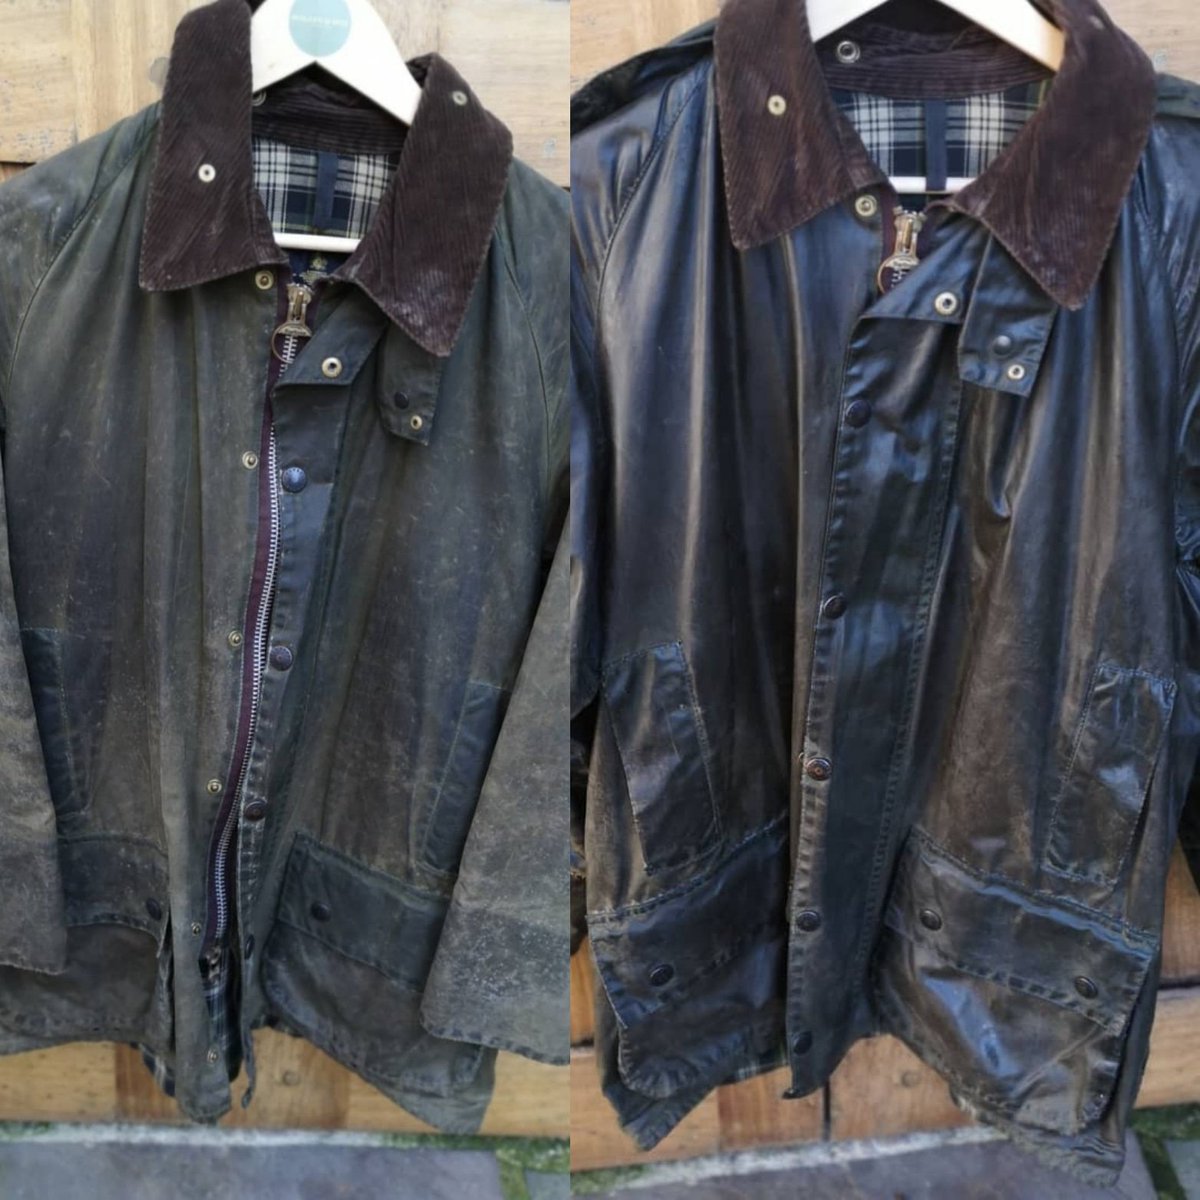 barbour jacket reproofing